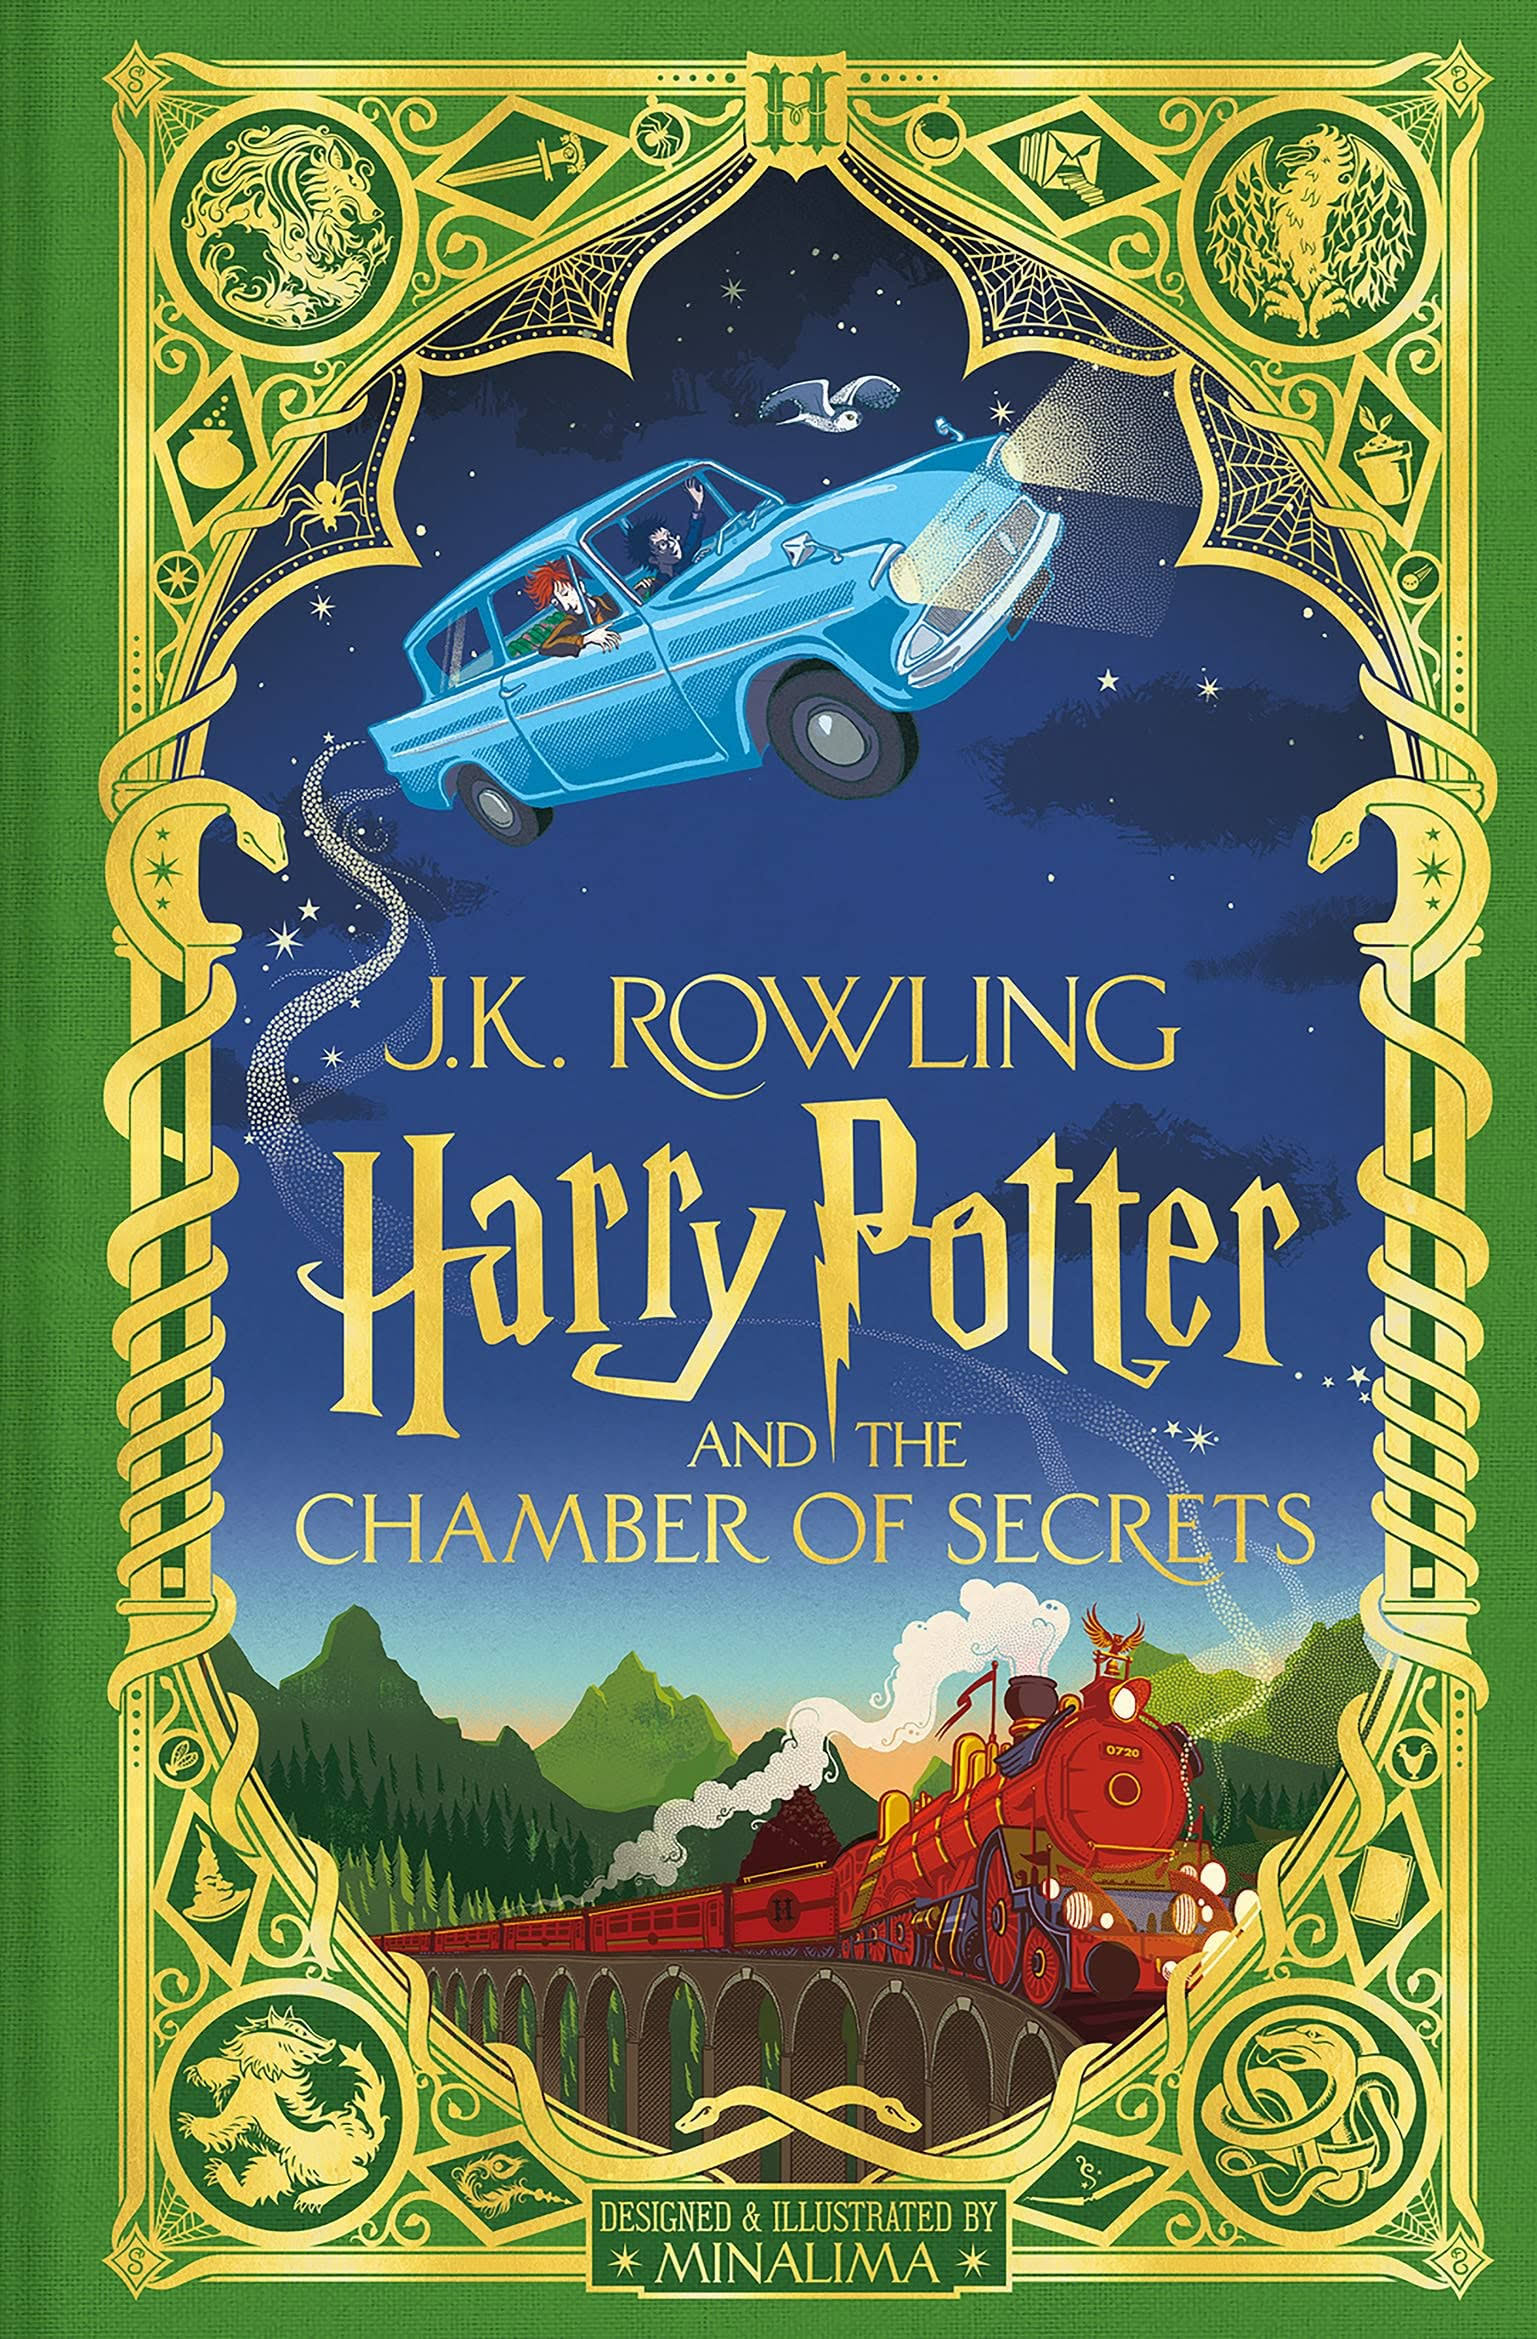 Harry Potter and The Chamber of Secrets MINALIMA Edition by J. K. Rowling